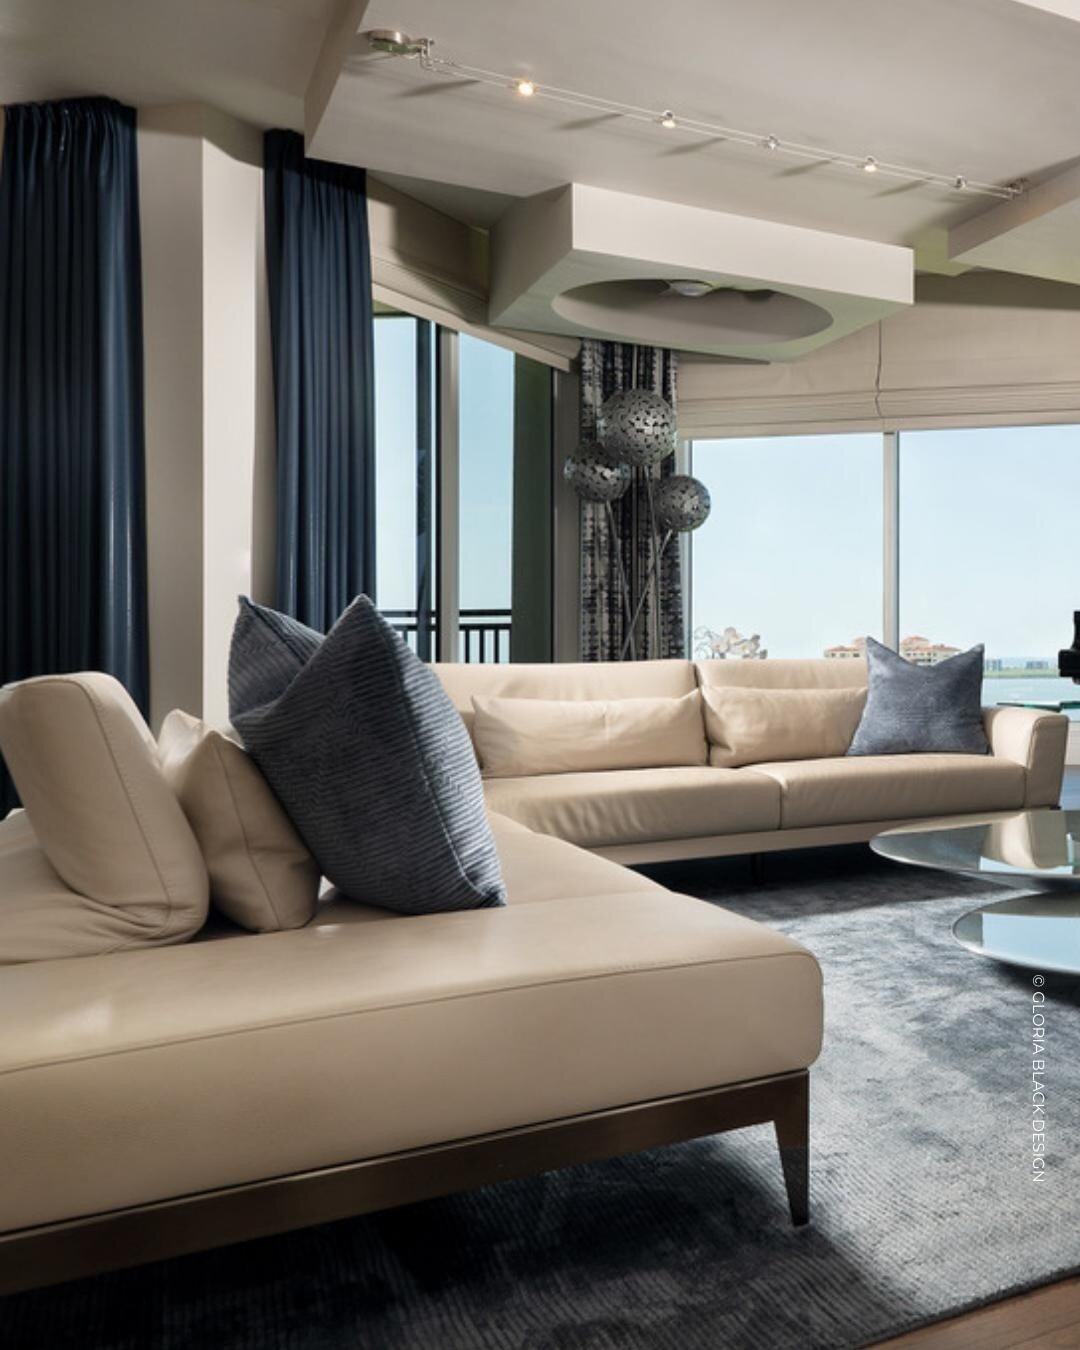 Where does your eye land?&nbsp;

Be sure to scroll to take in the whole view!&nbsp;

This is the living room of GBD&rsquo;s recent MODERN PENTHOUSE project. The goal here was to create a space that was ultra-modern, sleek, and comfortable.&nbsp;

Doe